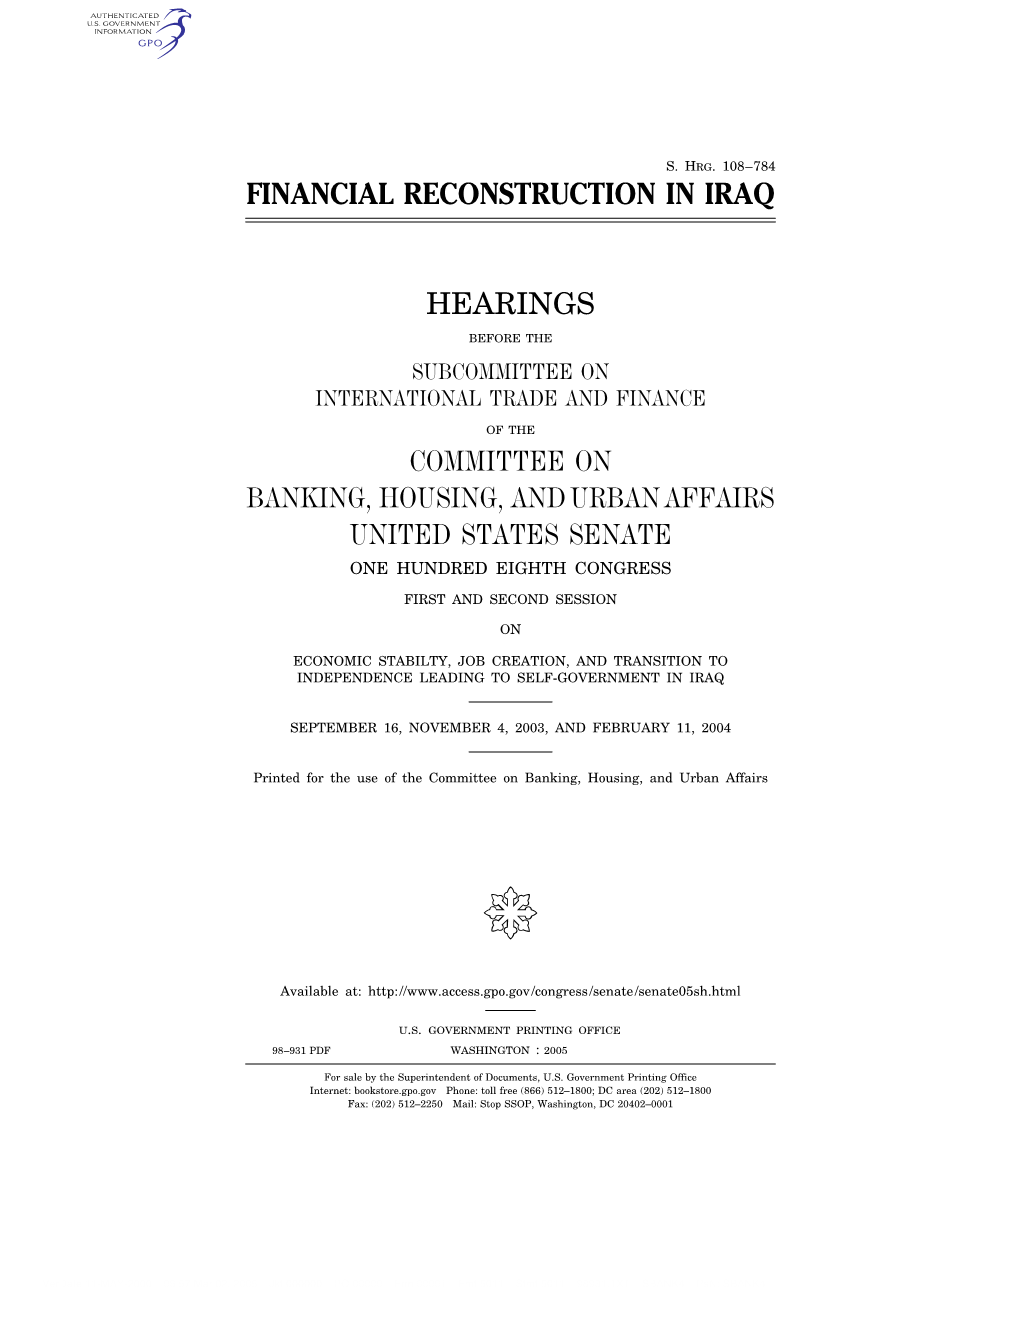 Financial Reconstruction in Iraq Hearings Committee